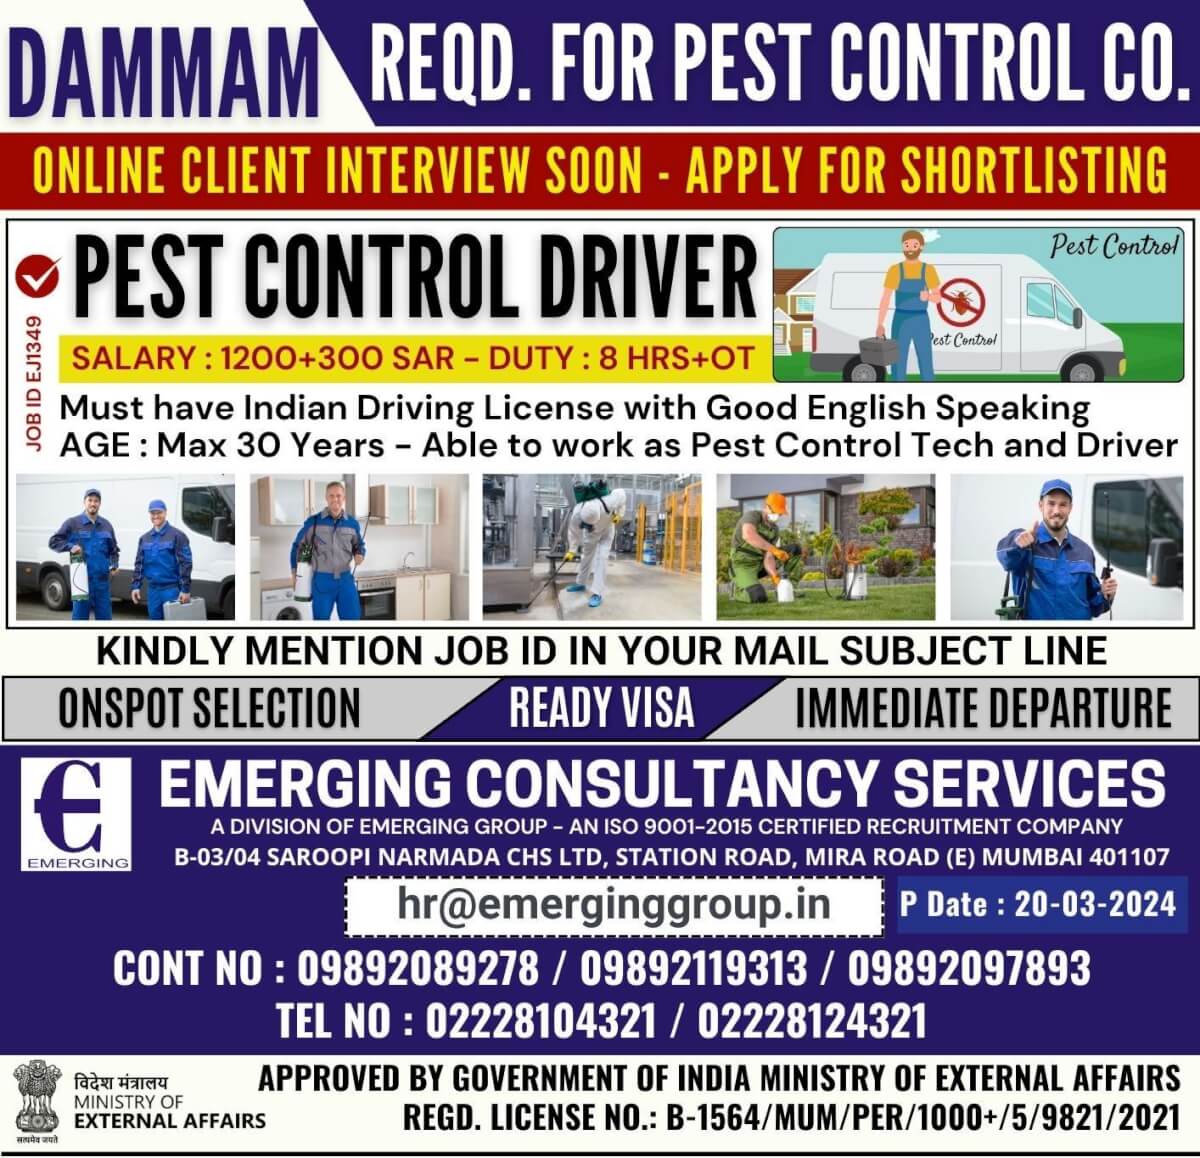 REQD. FOR PEST CONTROL CO. - ONLINE CLIENT INTERVIEW SOON - APPLY FOR SHORTLISTING